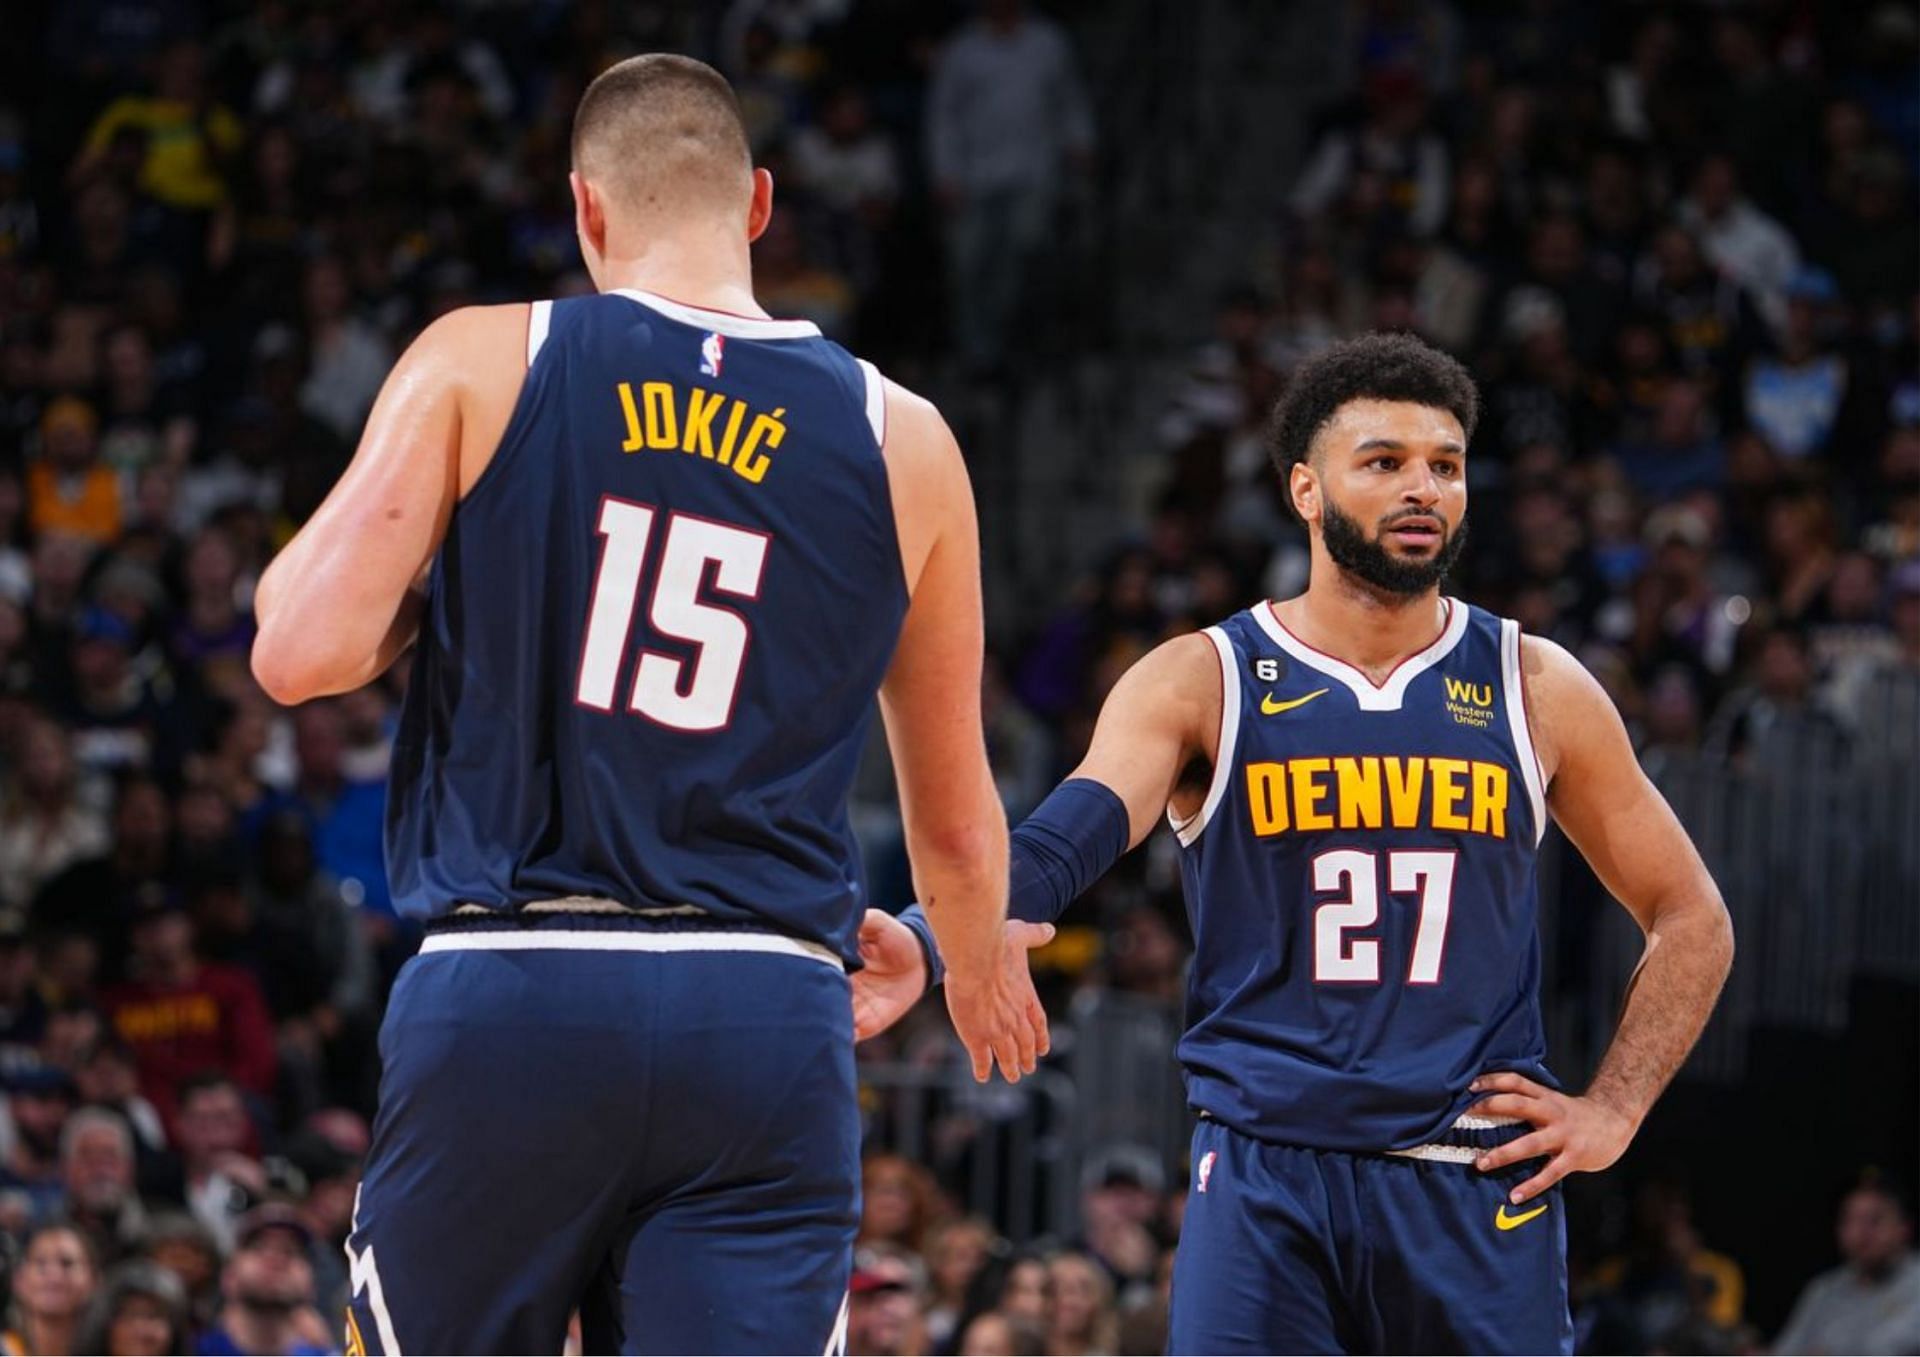 Nikola Jokic and Jamal Murray combined for 14 assists in Game 1 of the NBA Finals.